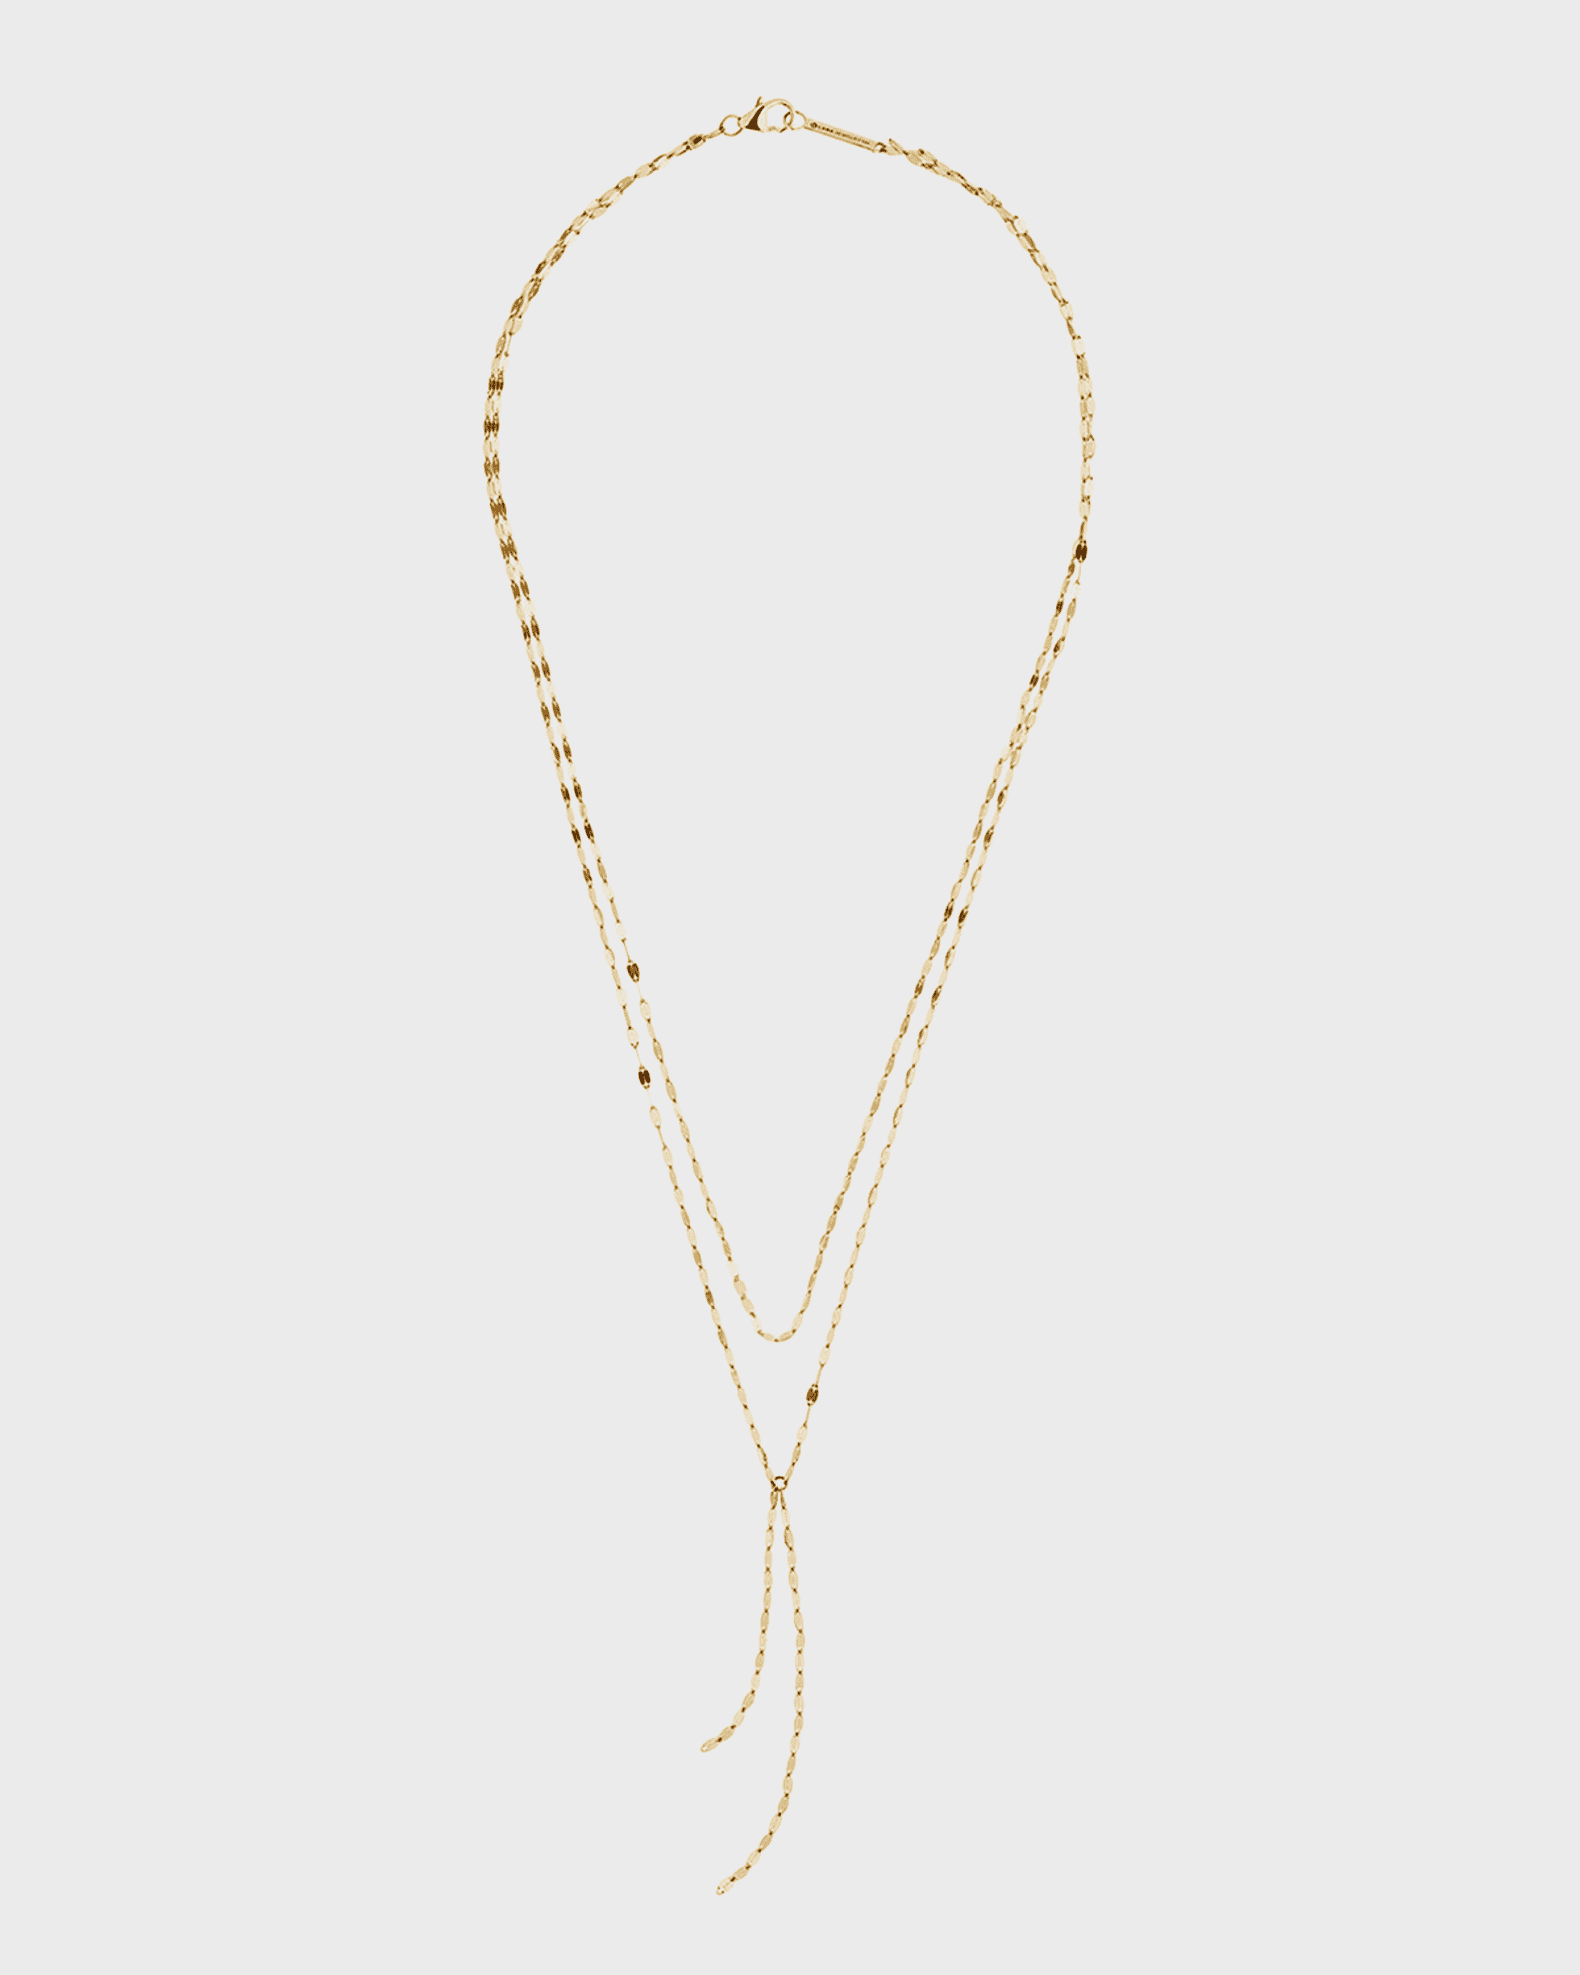 cc inspired necklace